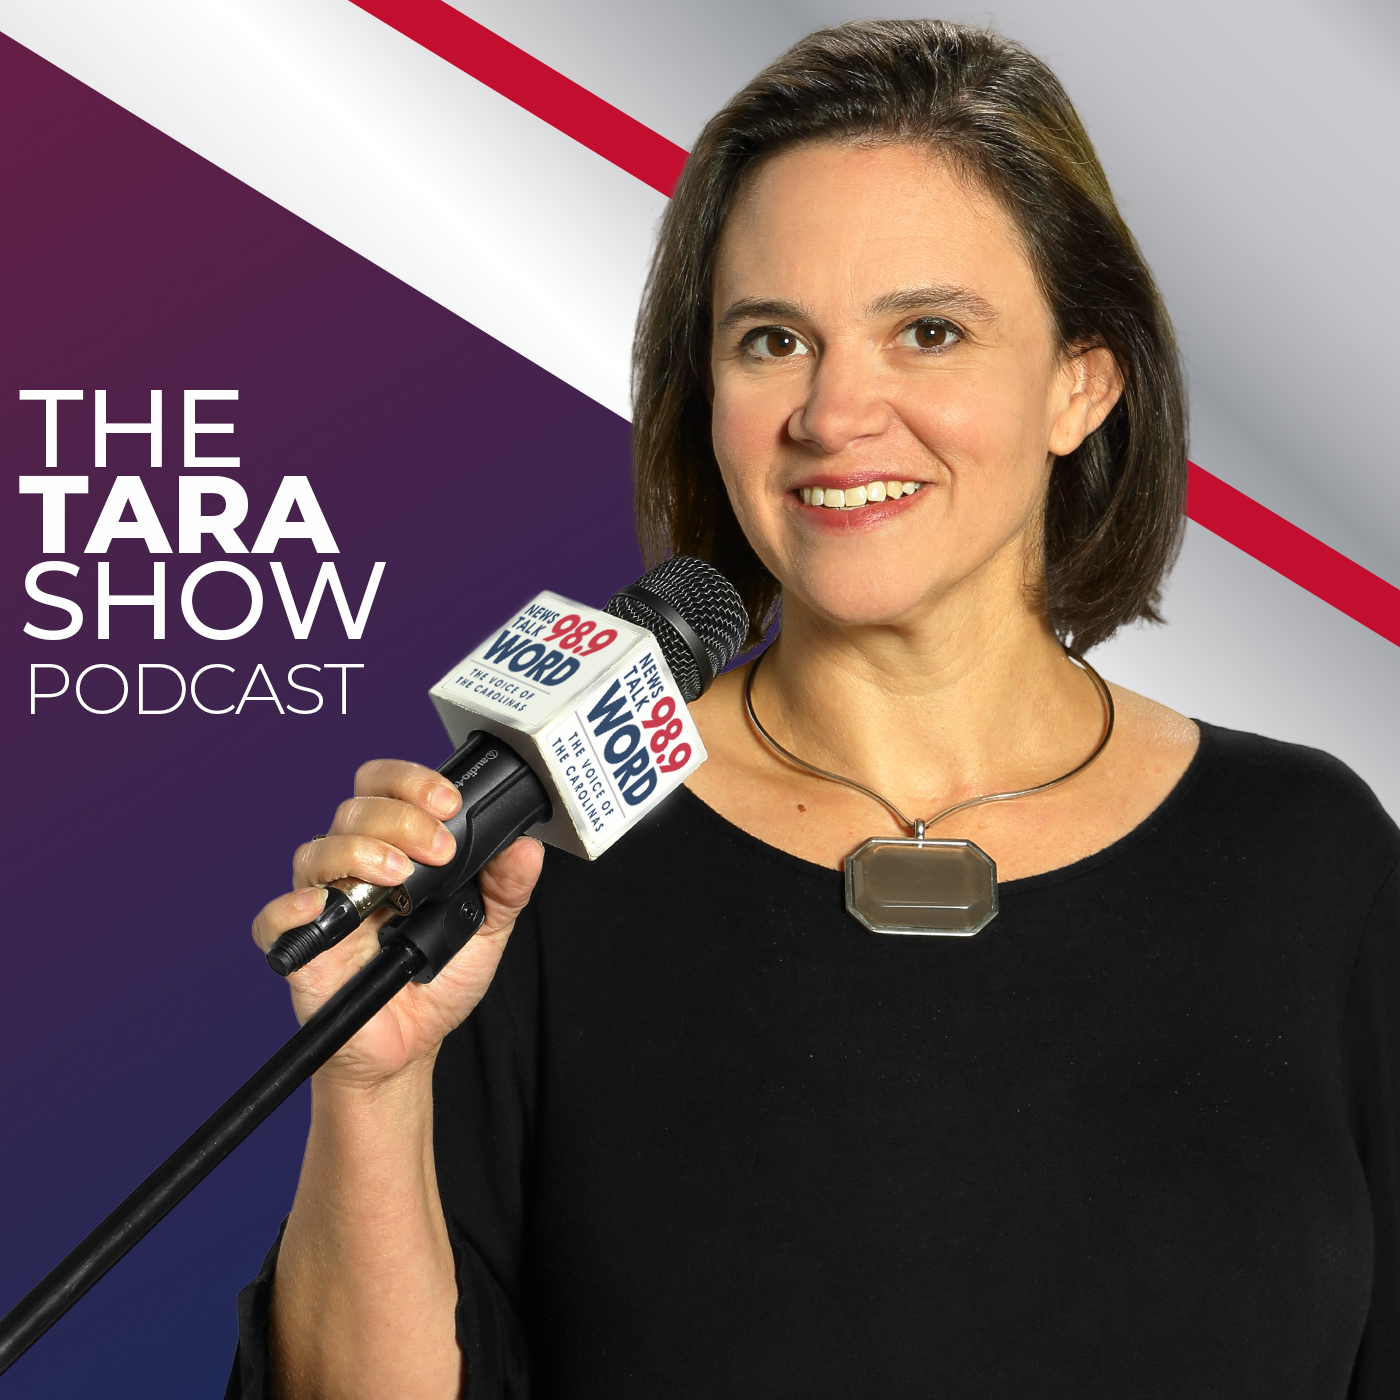 Hour 3: The Tara Show - “Too Much Work with Ryan and Lee” “Ryan Surprised about Nikki Haley” “Fast Food Prices with Ryan and Nick Neonakis” “Live Life on the Water” 